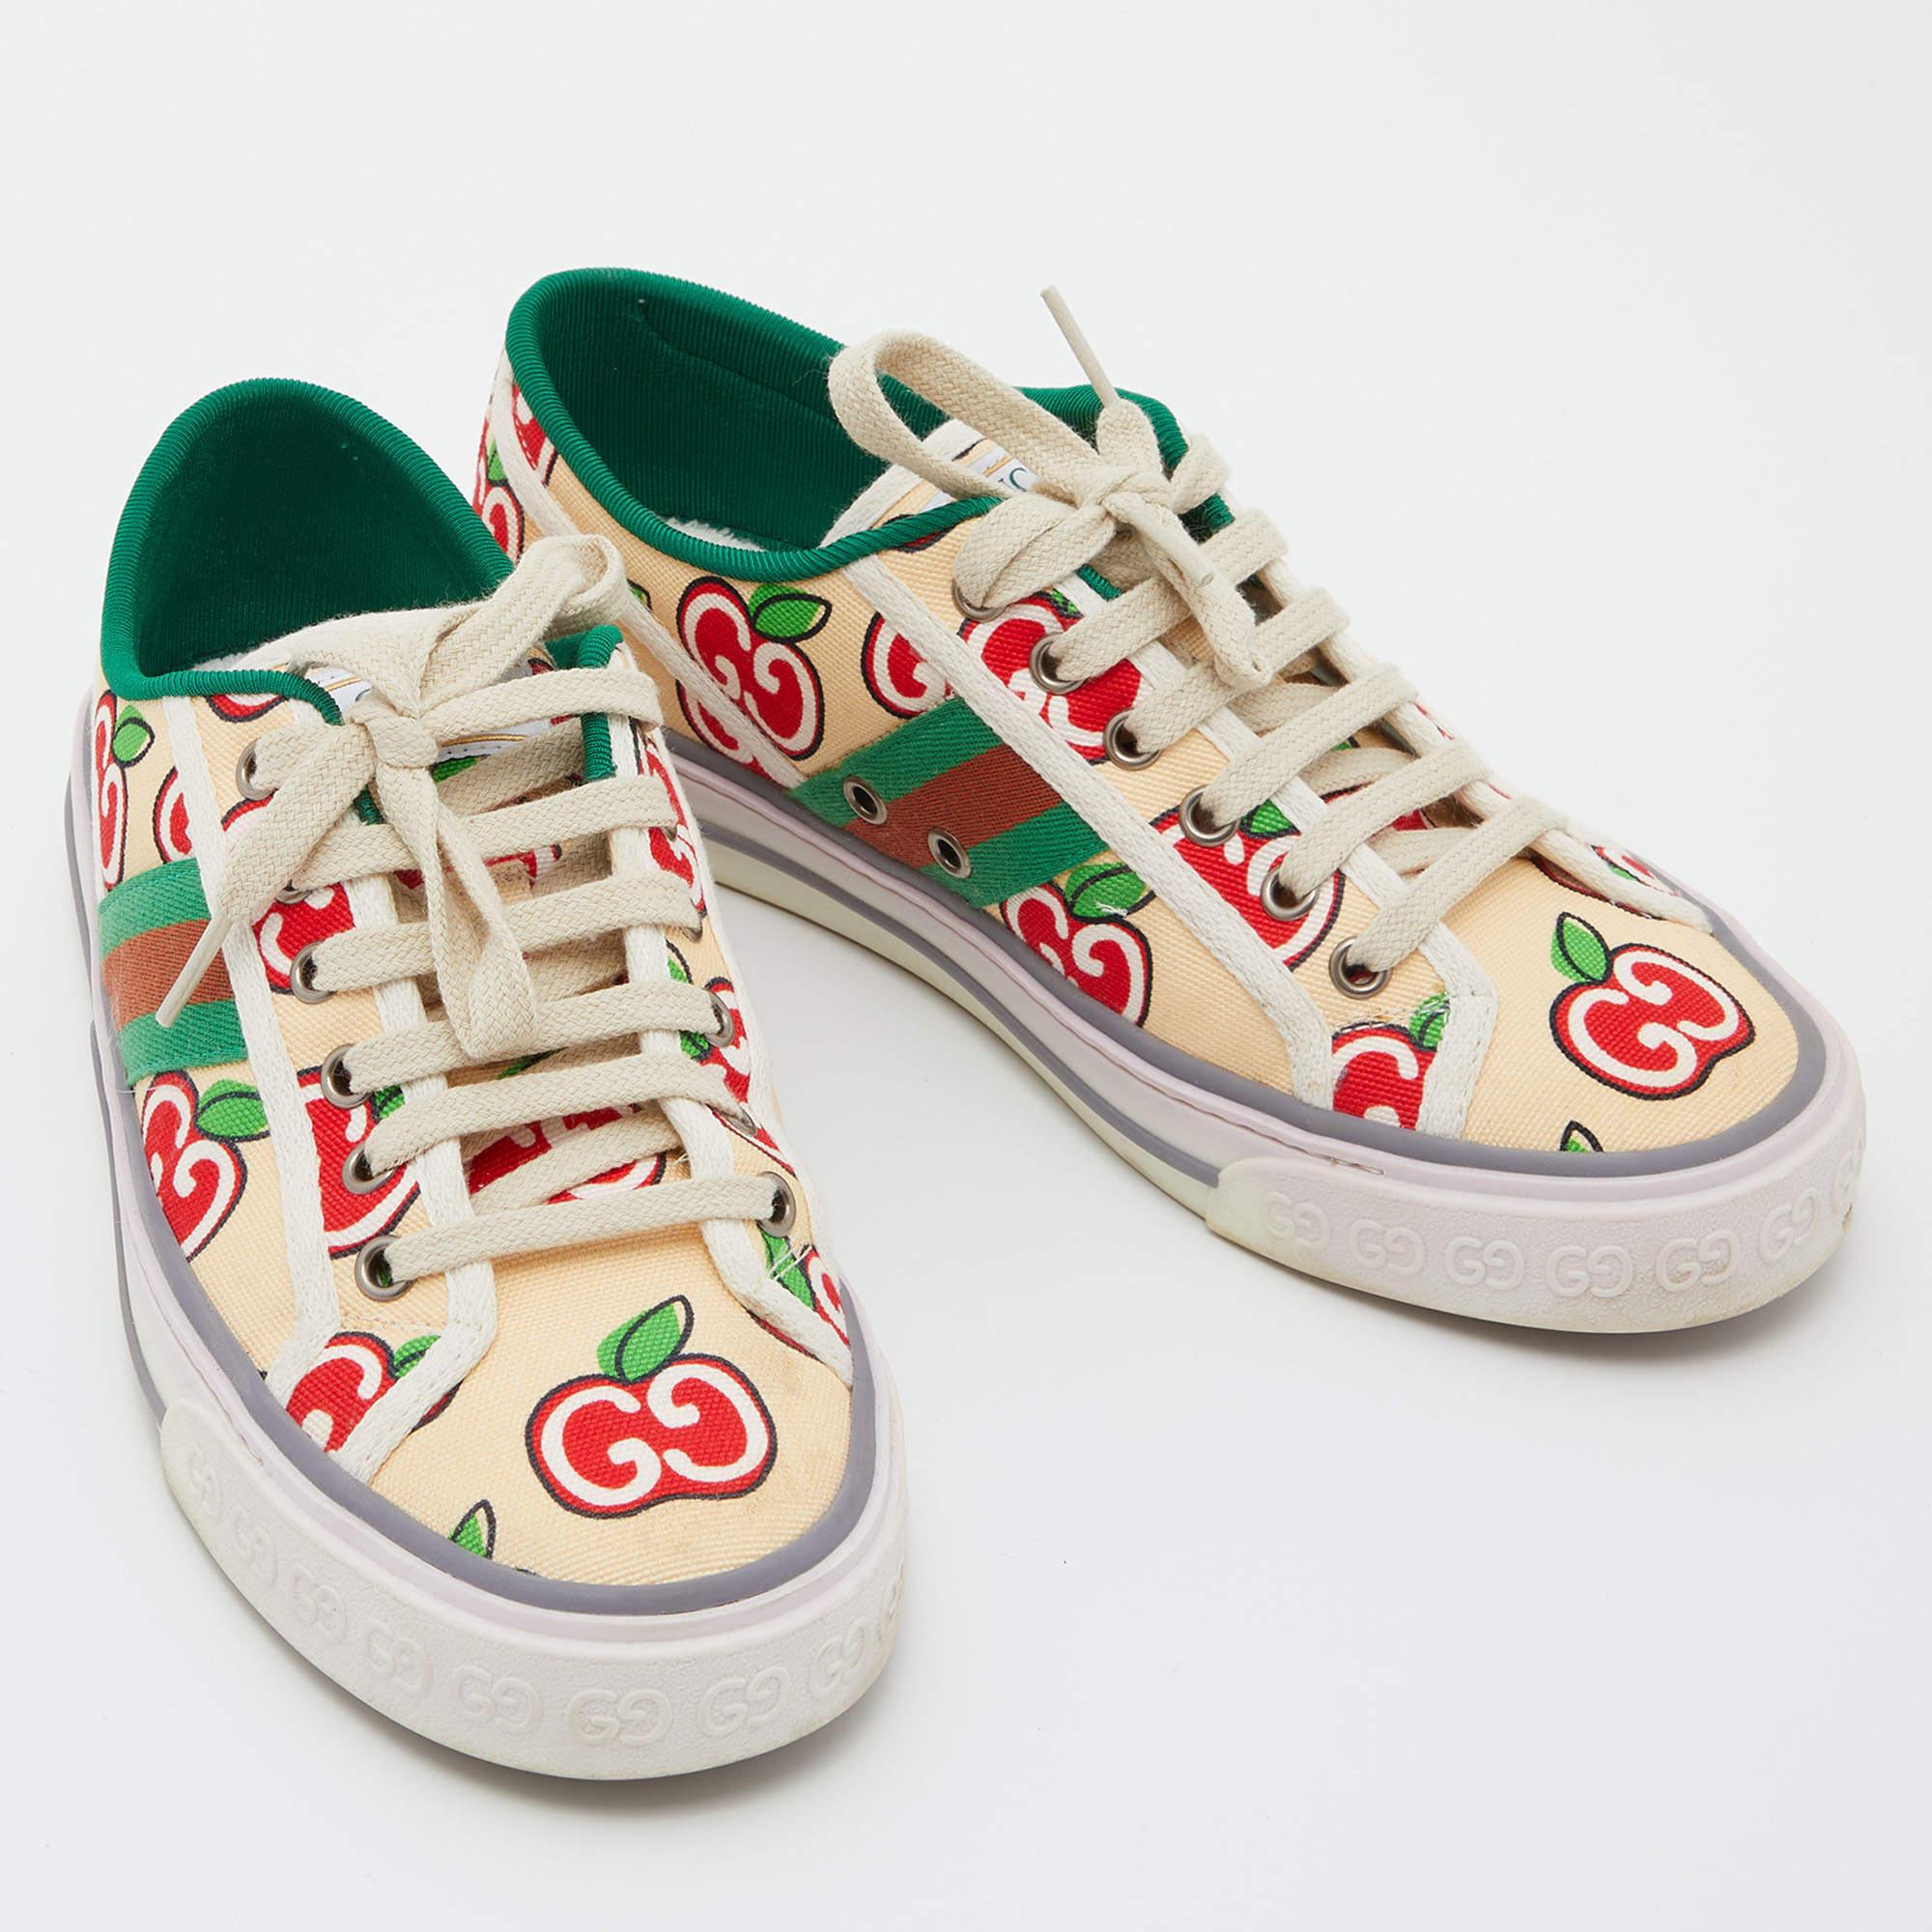 Women's Gucci Multicolor Canvas Tennis 1977 GG Apple Print Low Top Sneakers Size 38